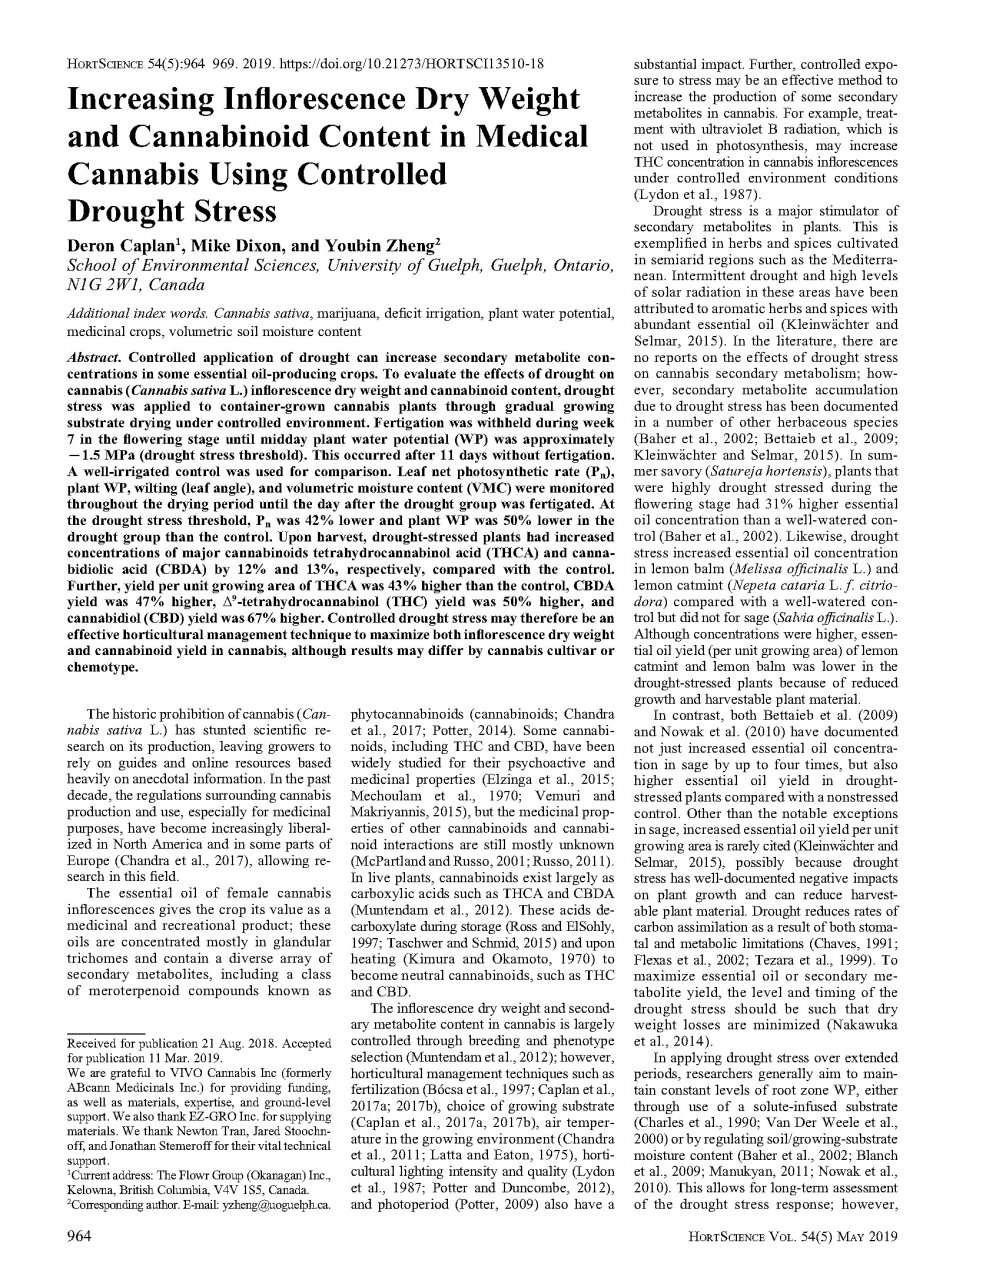 Page 1 - Increasing Dry Weight & Cannabinoid Content Using Controlled Drought Stress.jpg